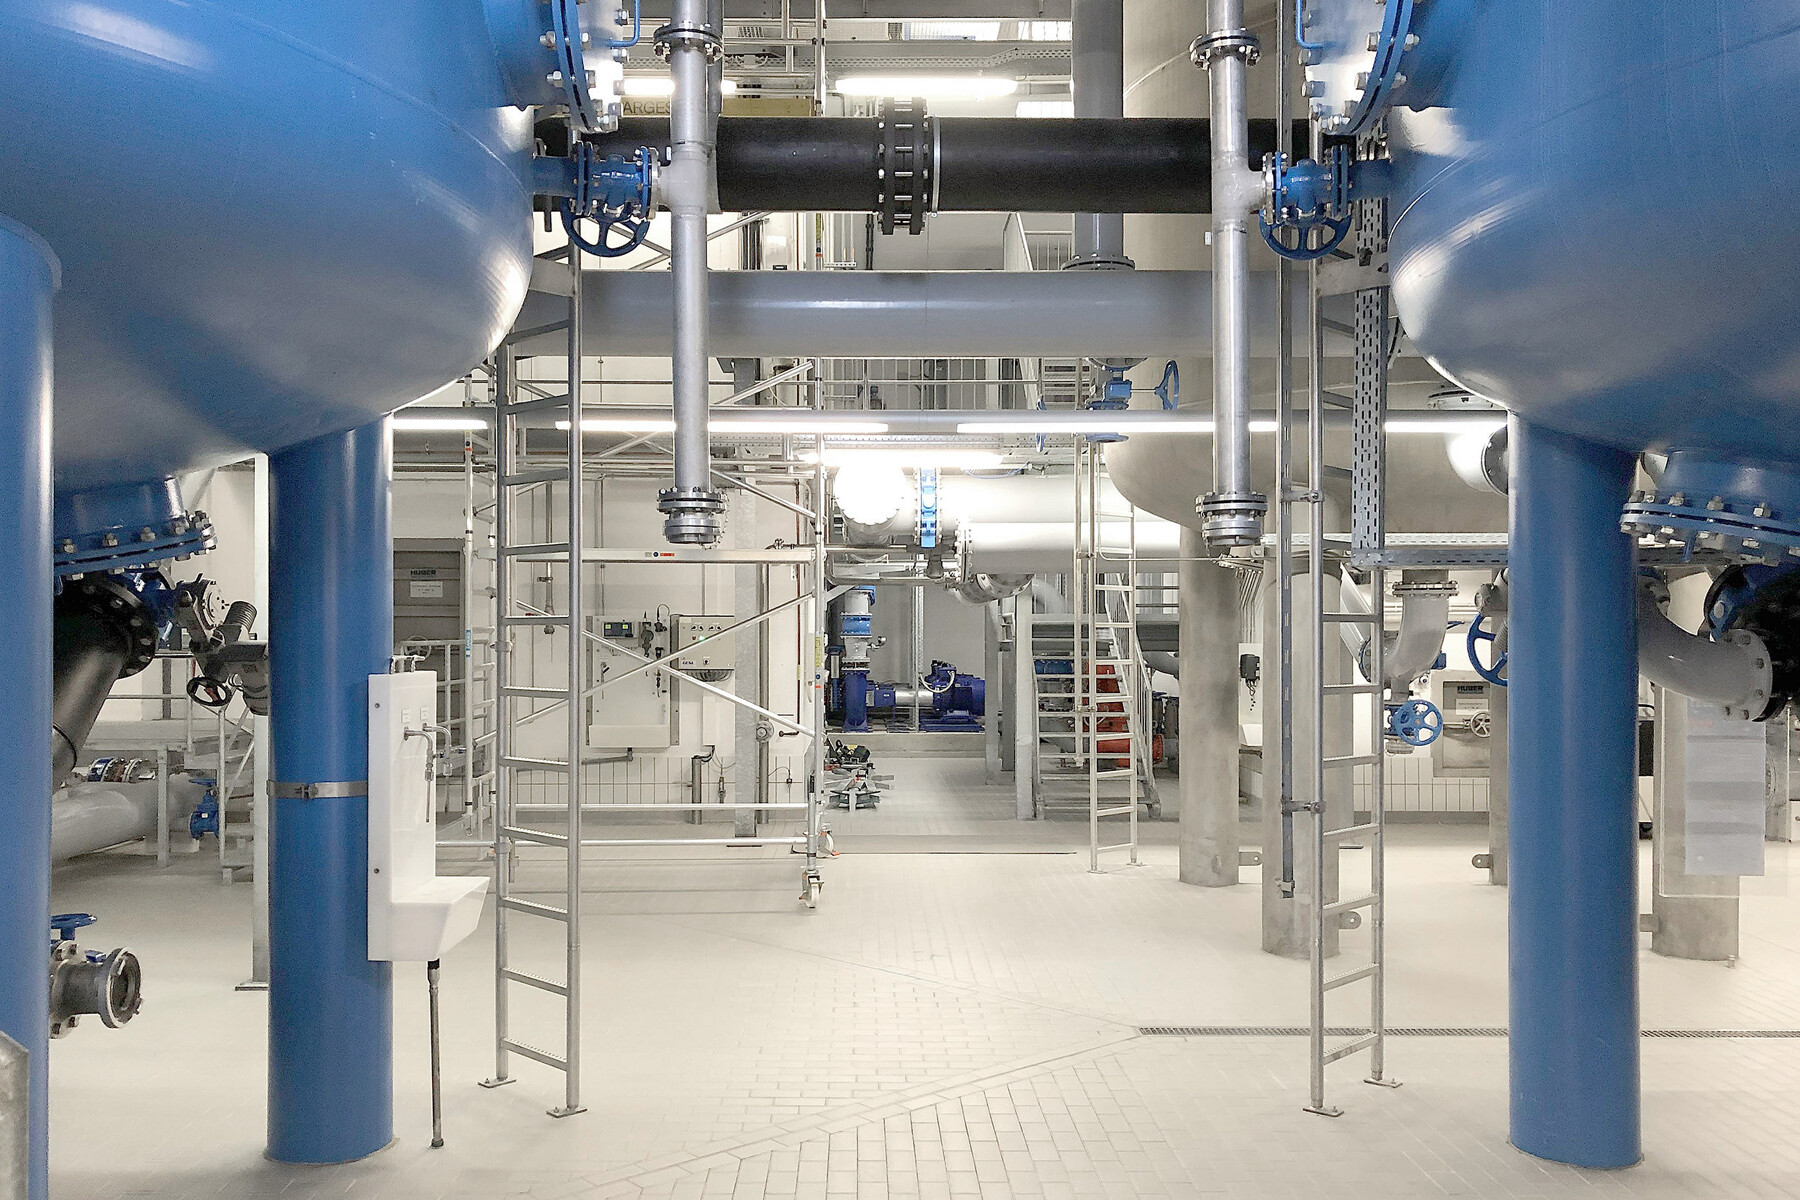 Filter vessels, pipes and valves in the technical installation building of the central “Krug von Nidda” waterworks